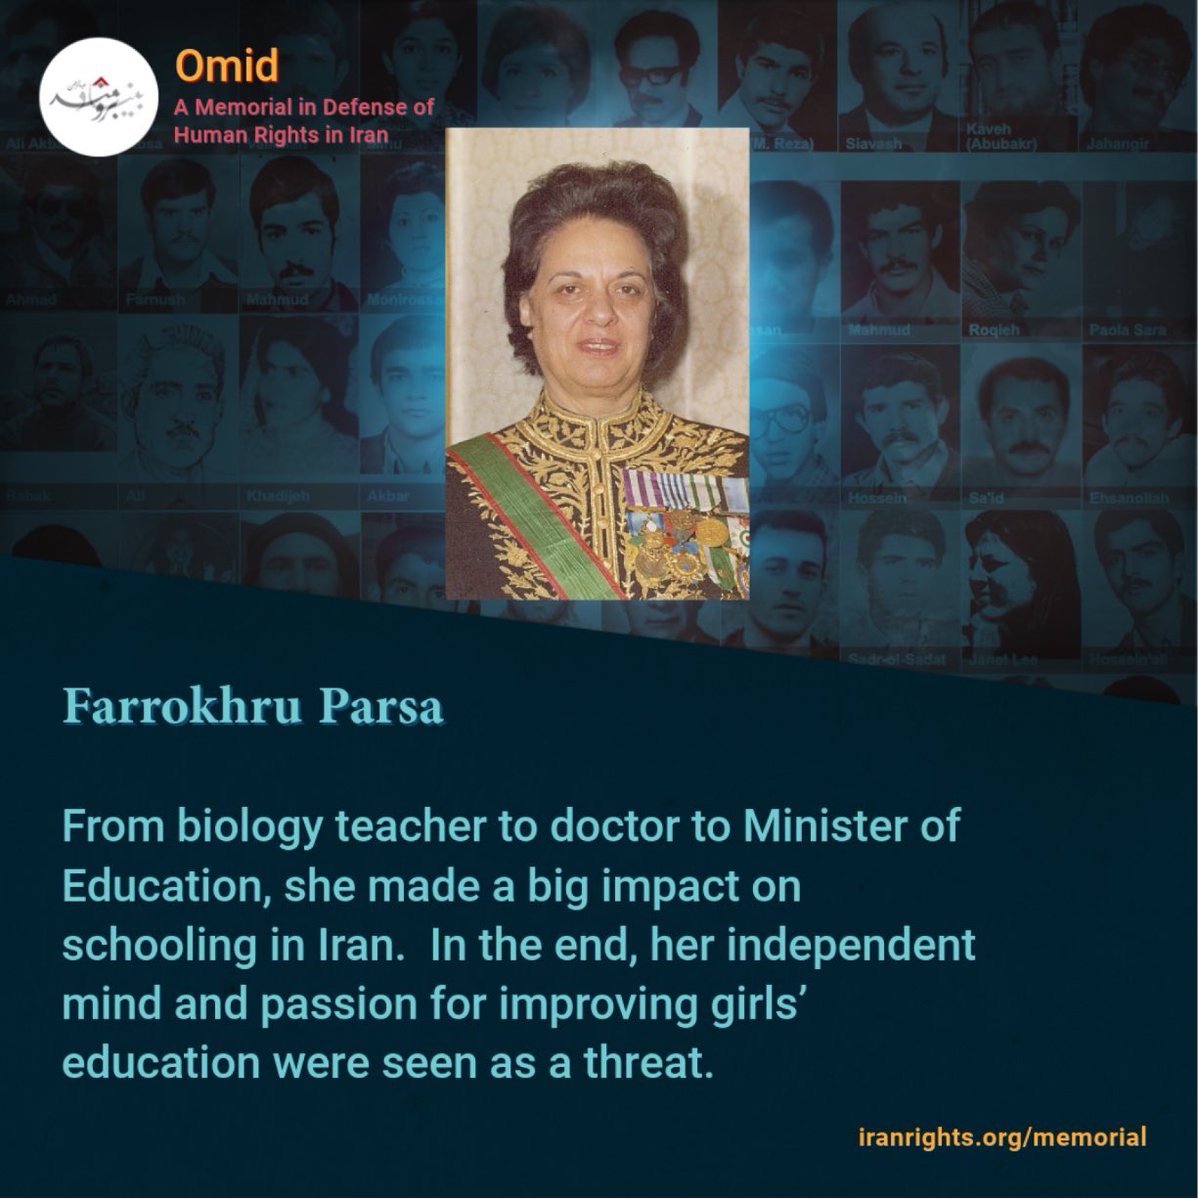 On May 8, 1980, #FarrokhruParsa, former Minister of Education and an outspoken supporter of women's rights in Iran, was executed by an Islamic Republic firing squad. Read her story on #OmidMemorial: iranrights.org/memorial/story…